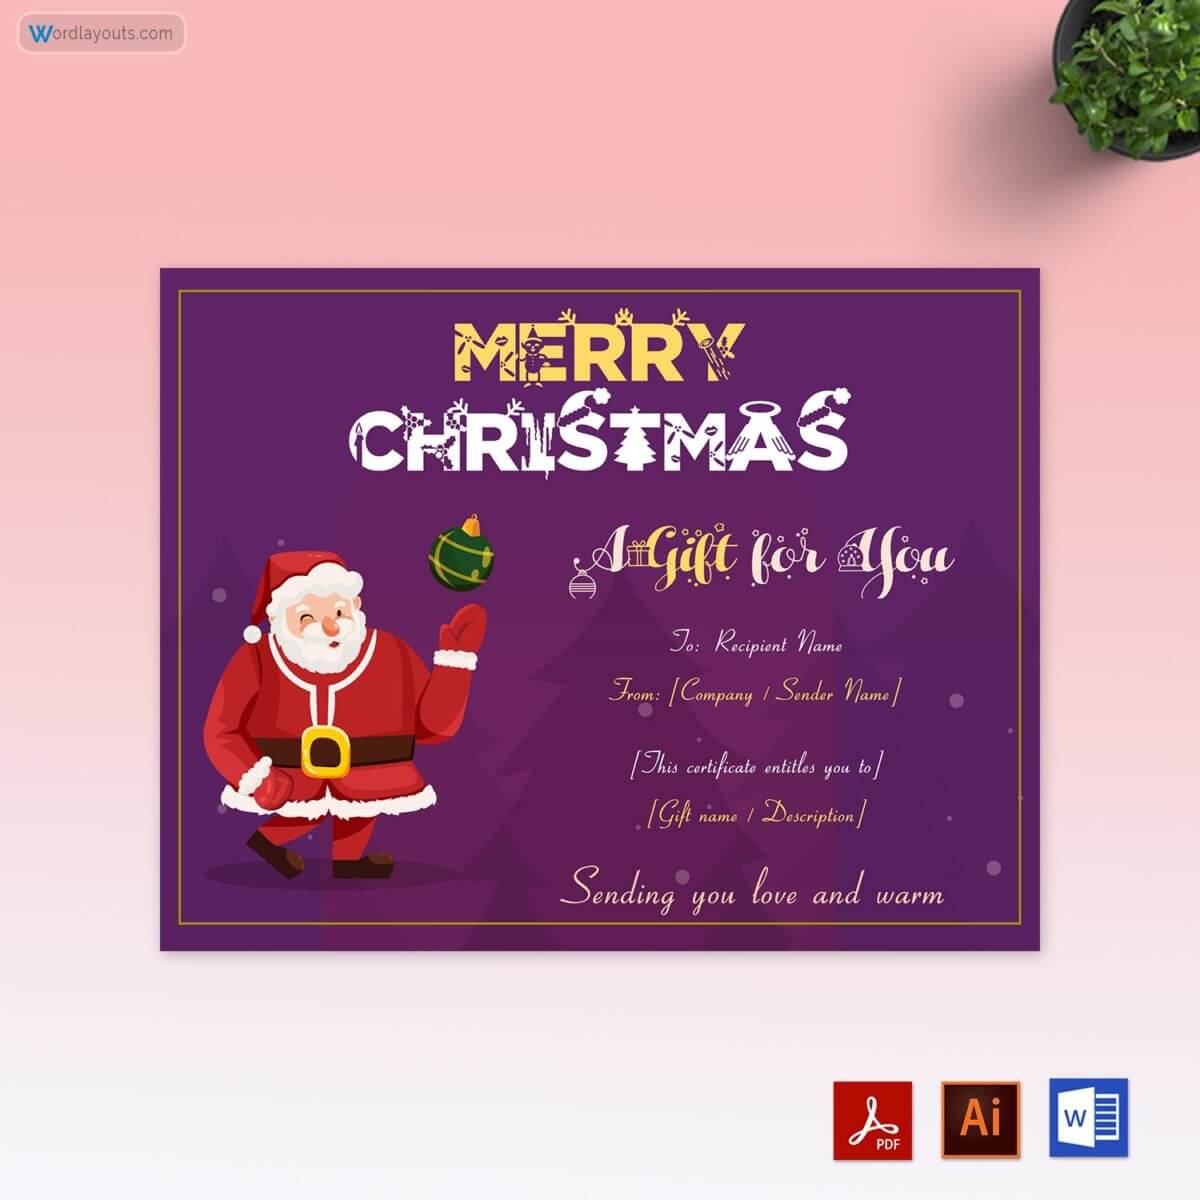 Free Downloadable Christmas Gift Certificate Template 09 for Word, Adobe and AI Format